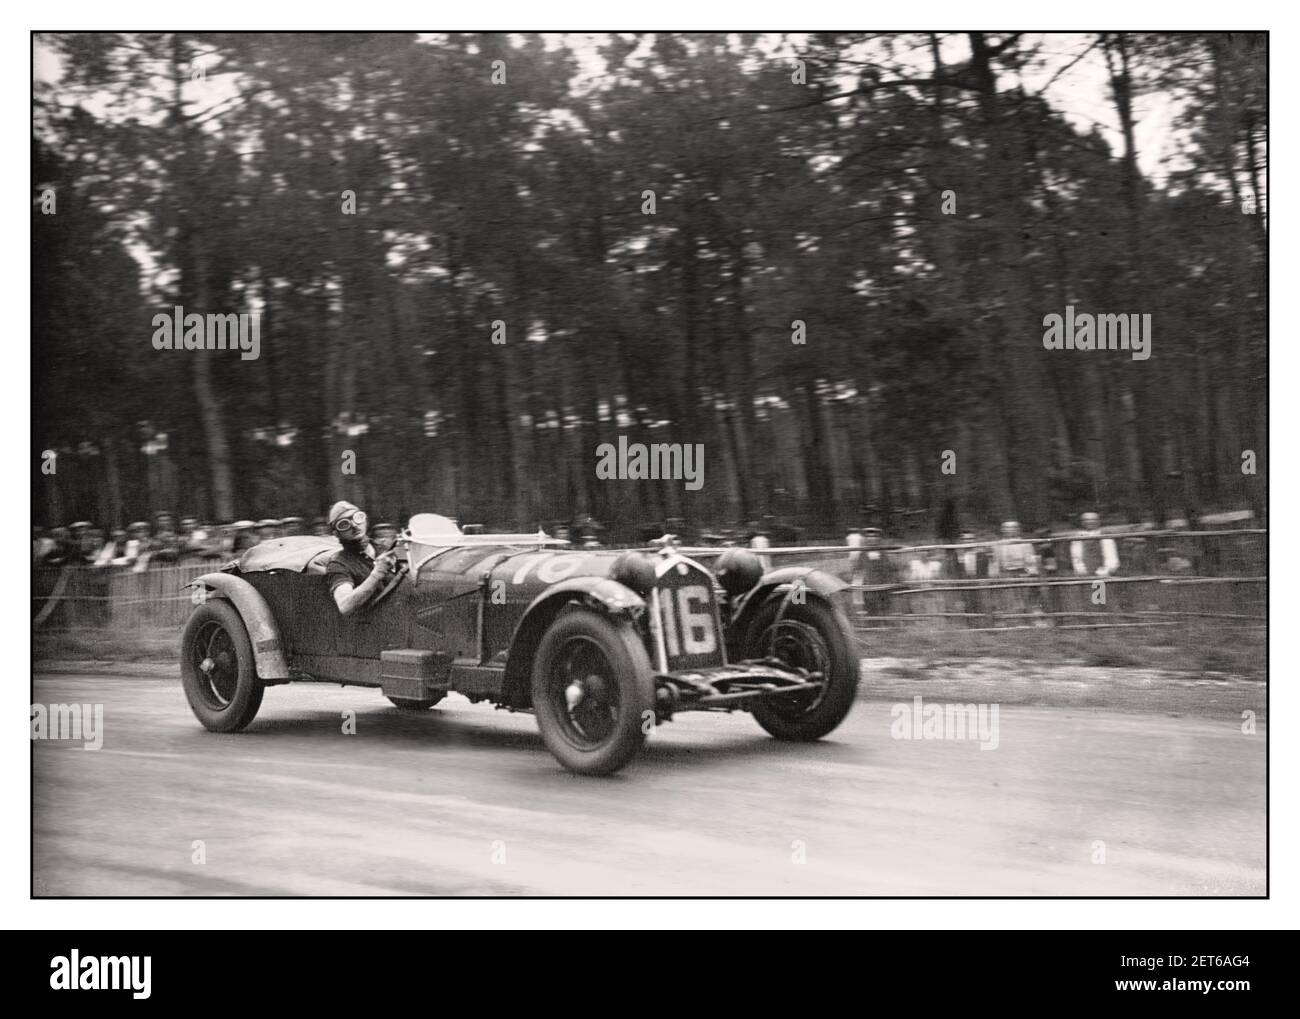 Le Mans 24 hr Vintage 1931 Winning Alfa Romeo No.16 of Birkin and Howe pictured at the 1931 24 Hours of Le Mans endurance race Le Mans France Stock Photo